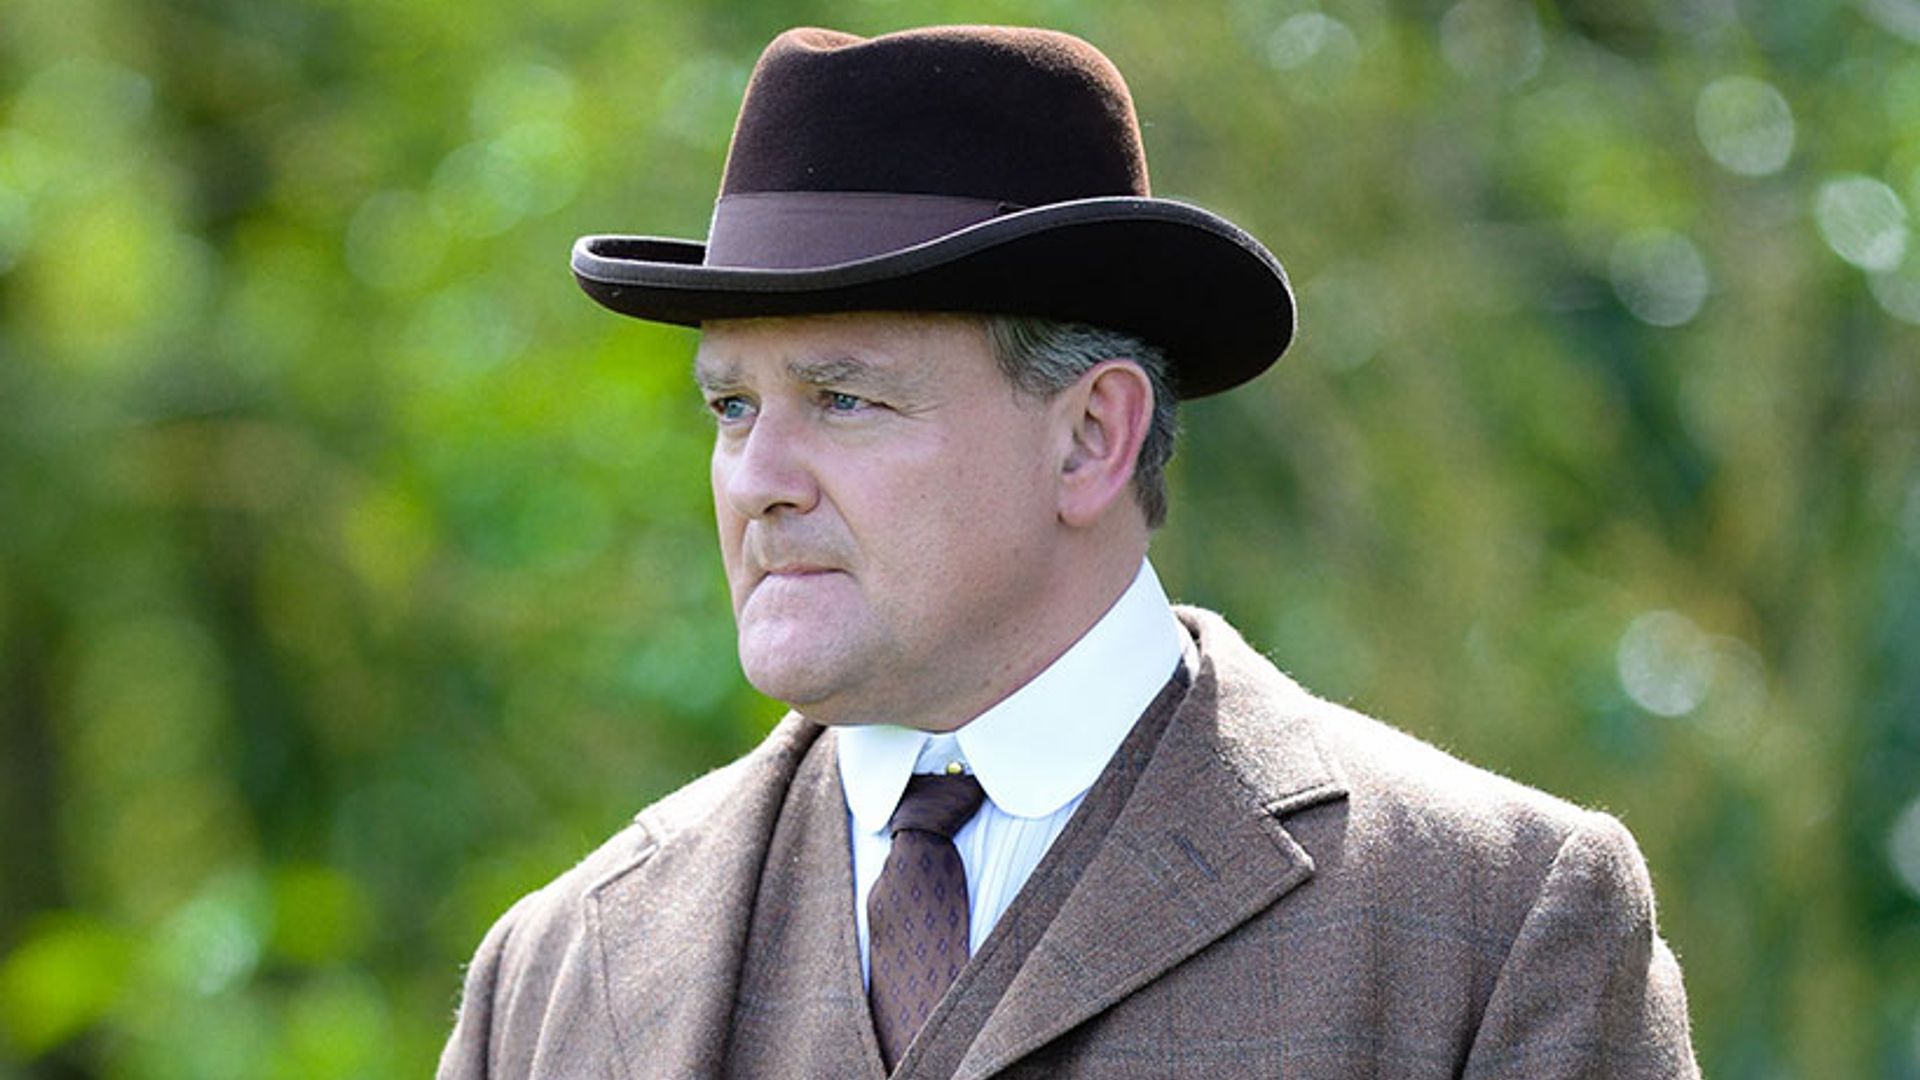 Downton Abbey star Hugh Bonneville reveals exciting new project